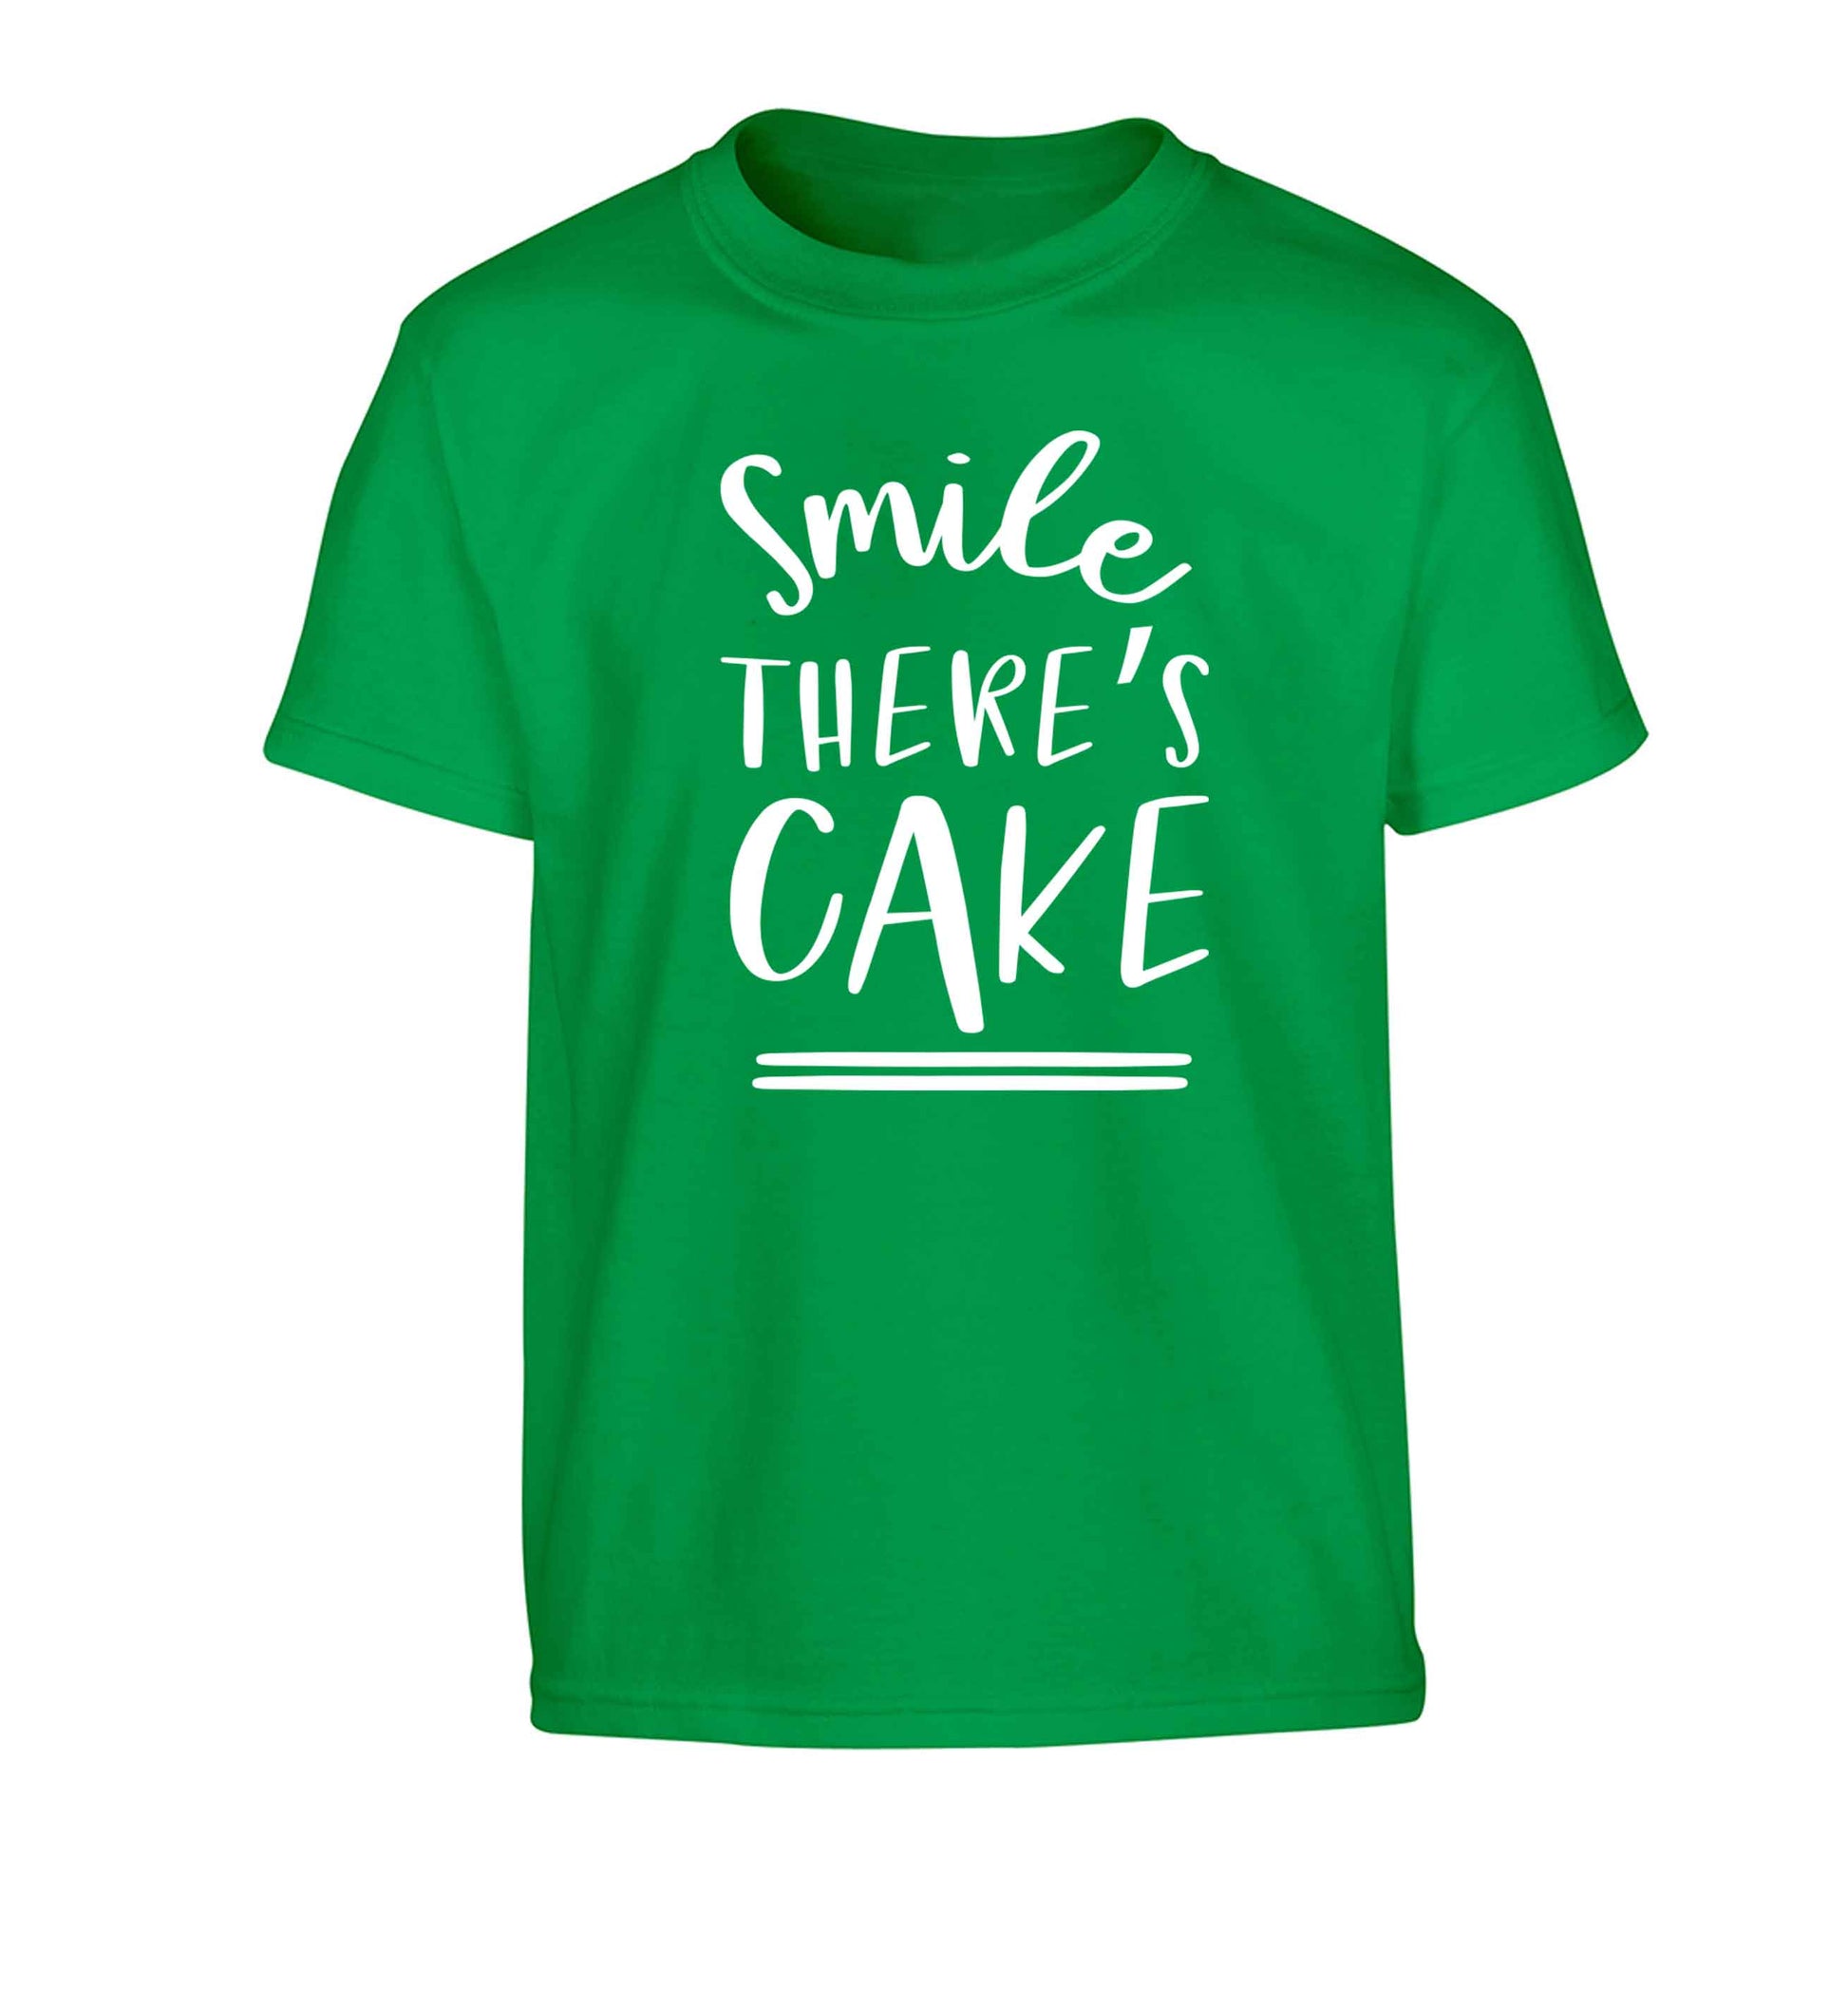 Smile there's cake Children's green Tshirt 12-13 Years